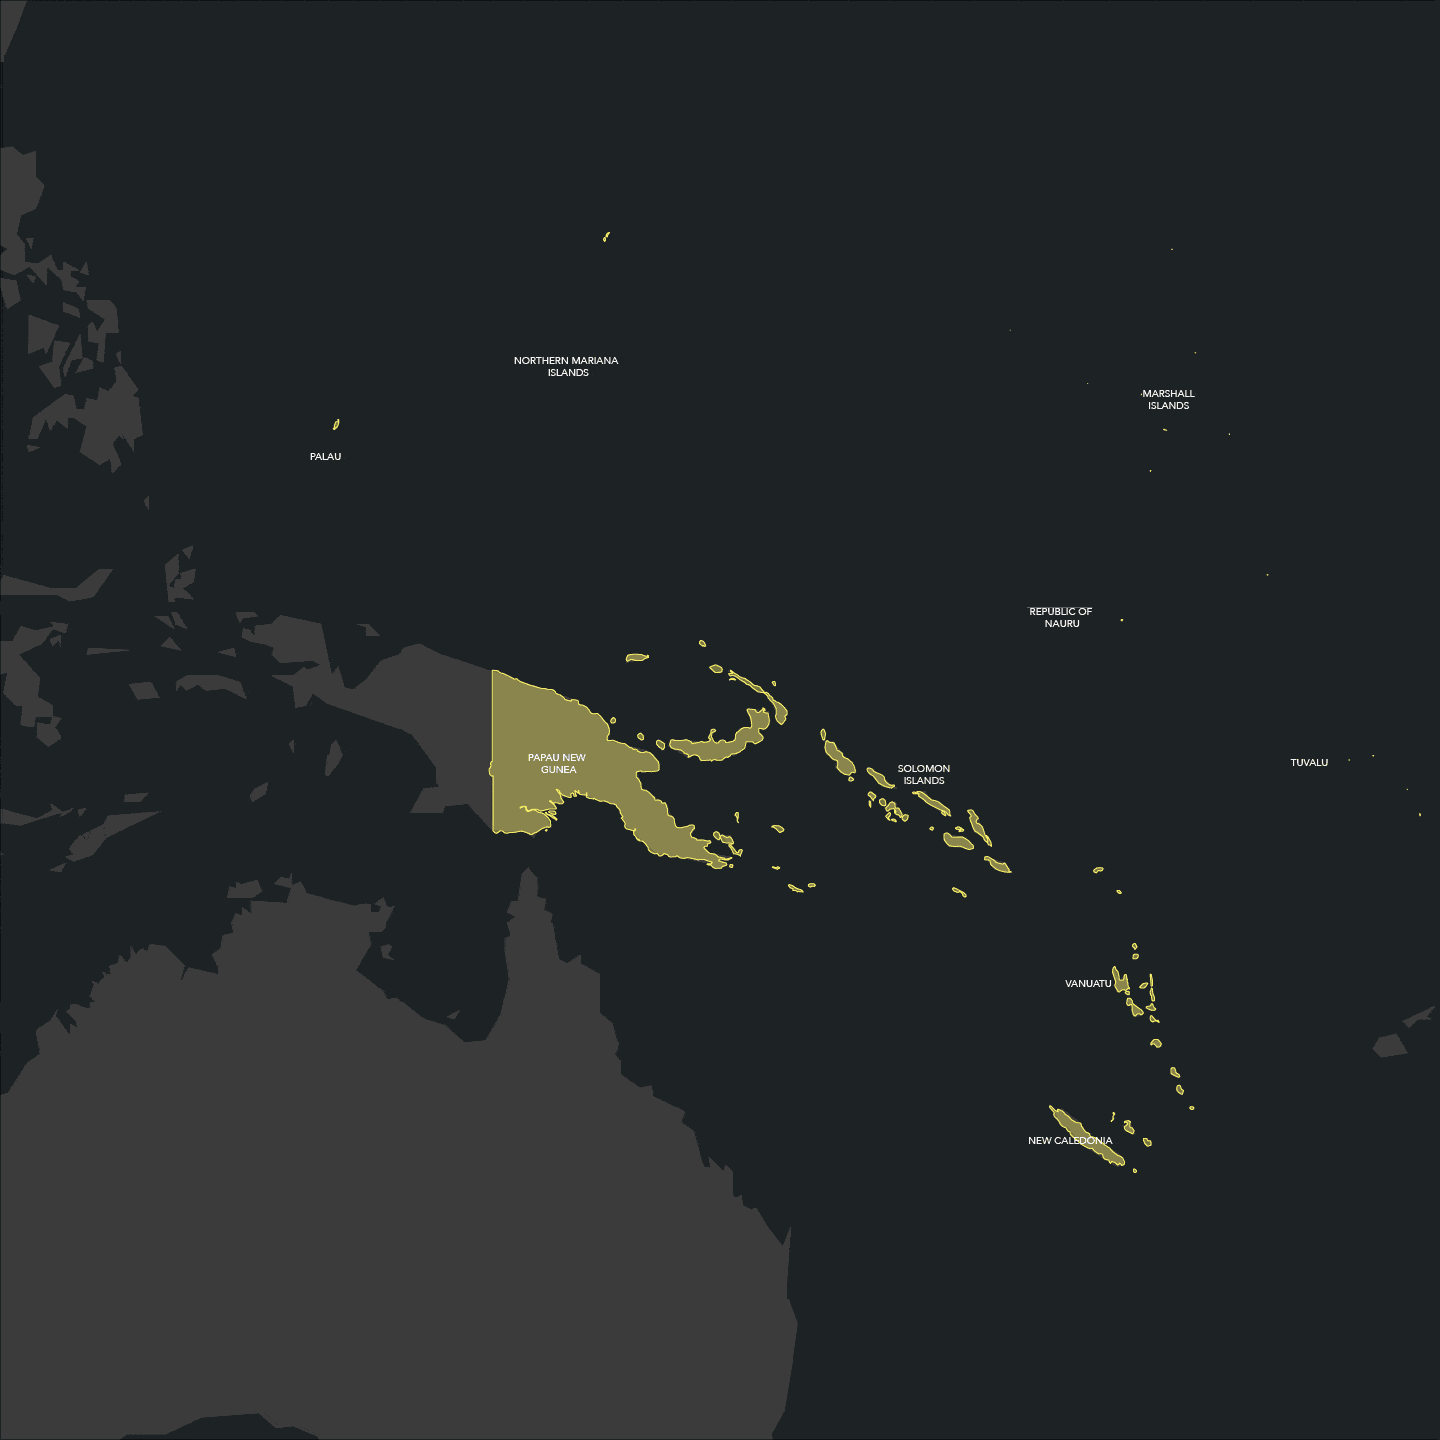 Map of Oceania with qualified countries highlighted